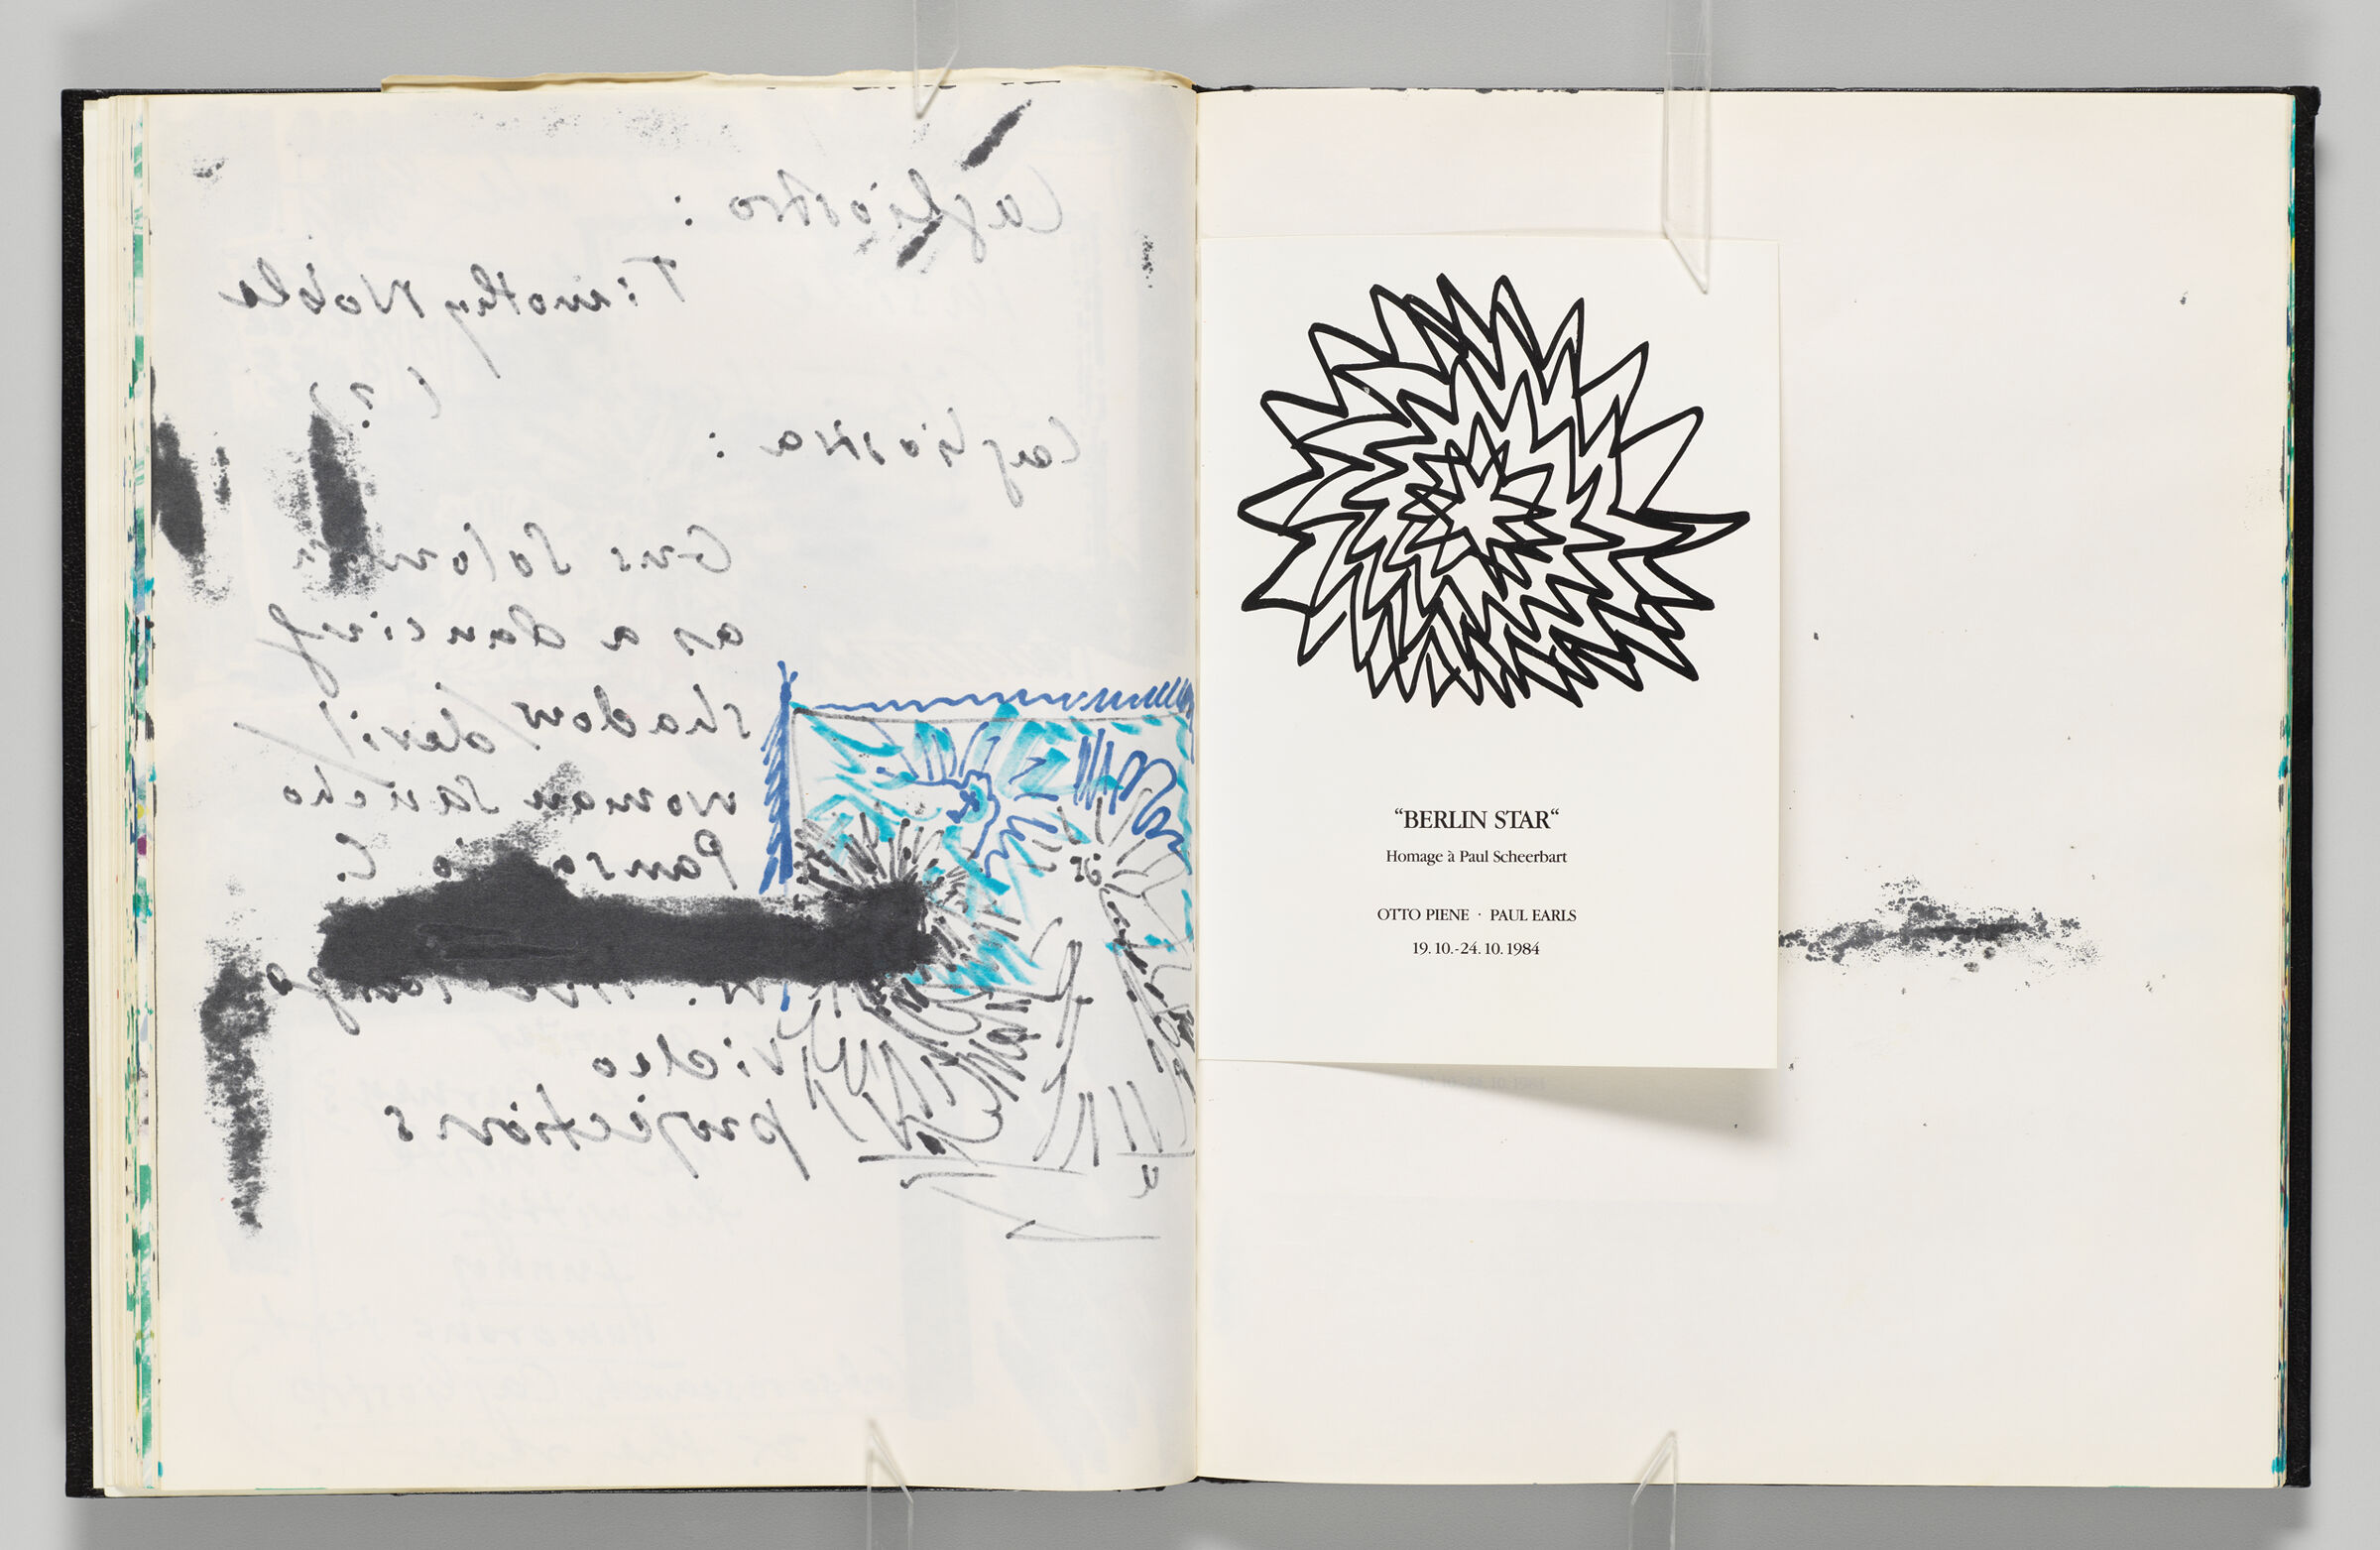 Untitled (Bleed-Through Of Previous Page, Left Page); Untitled (Blank With Color Transfer And Pasted-In Invitation, Right Page)